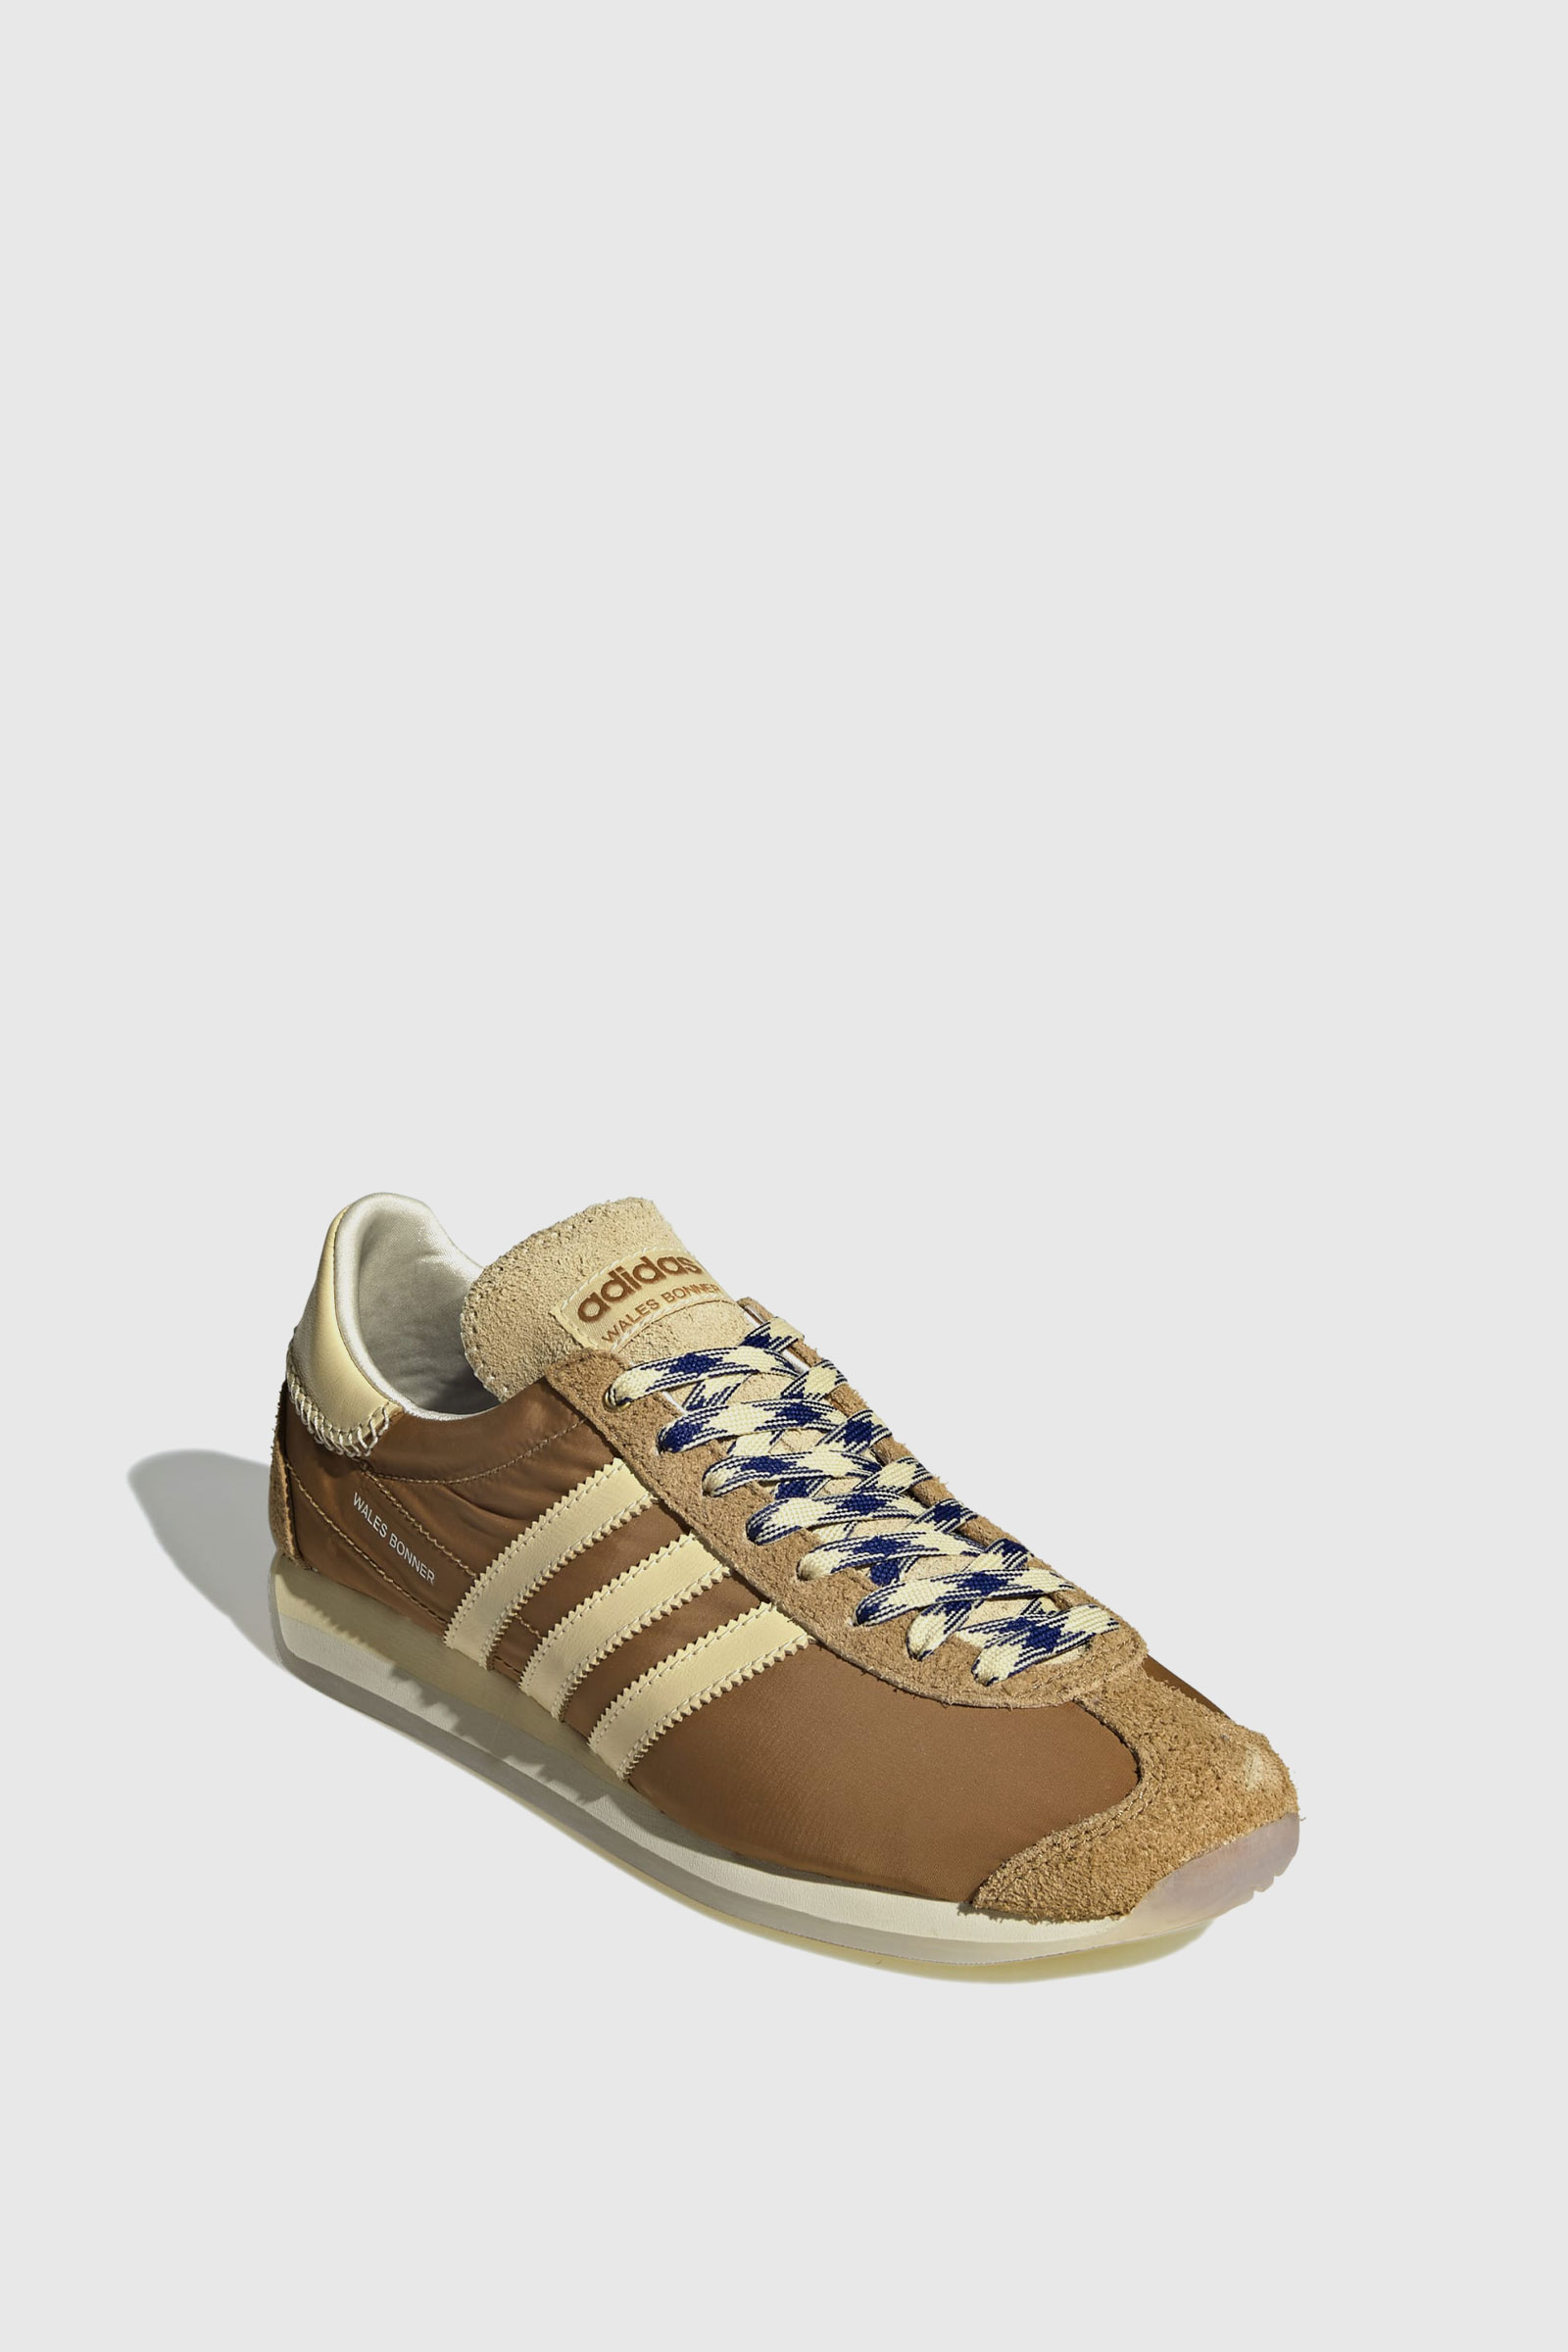 adidas Wales Bonner Country Mesa/ easy yellow/ mysteryink 